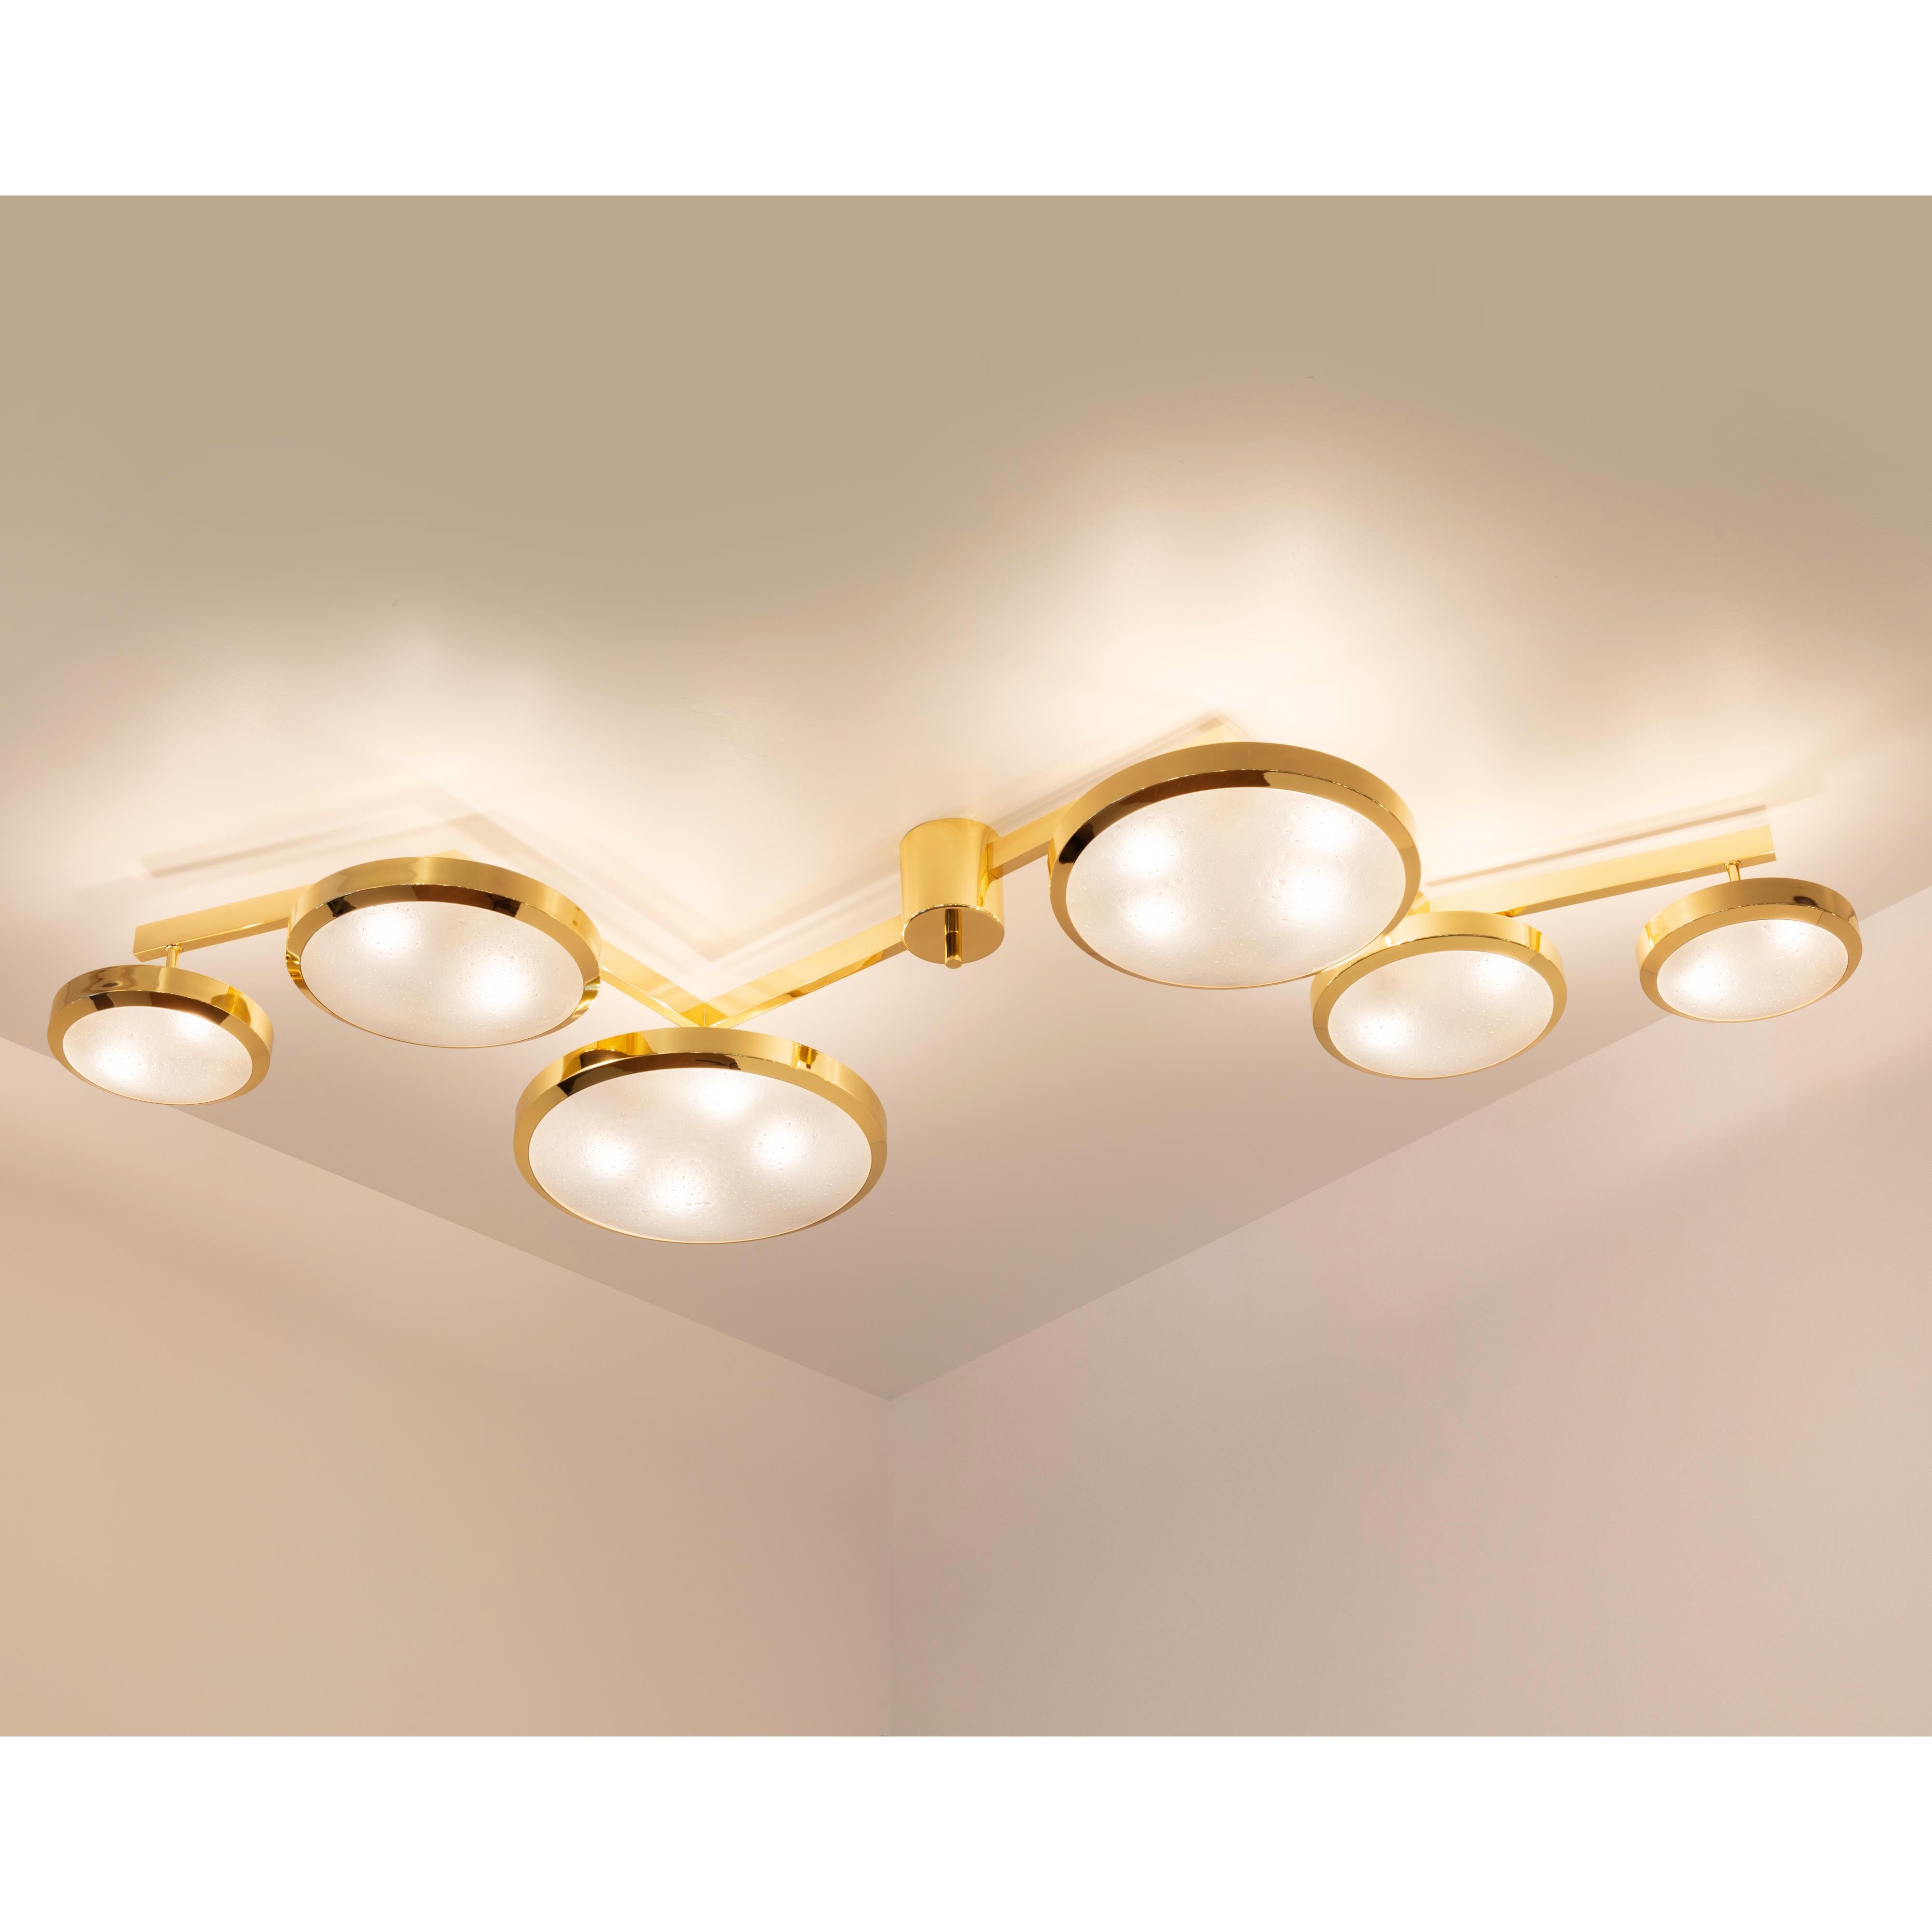 Geometria Sospesa Ceiling Light by Gaspare Asaro-Polished Brass Finish In New Condition For Sale In New York, NY